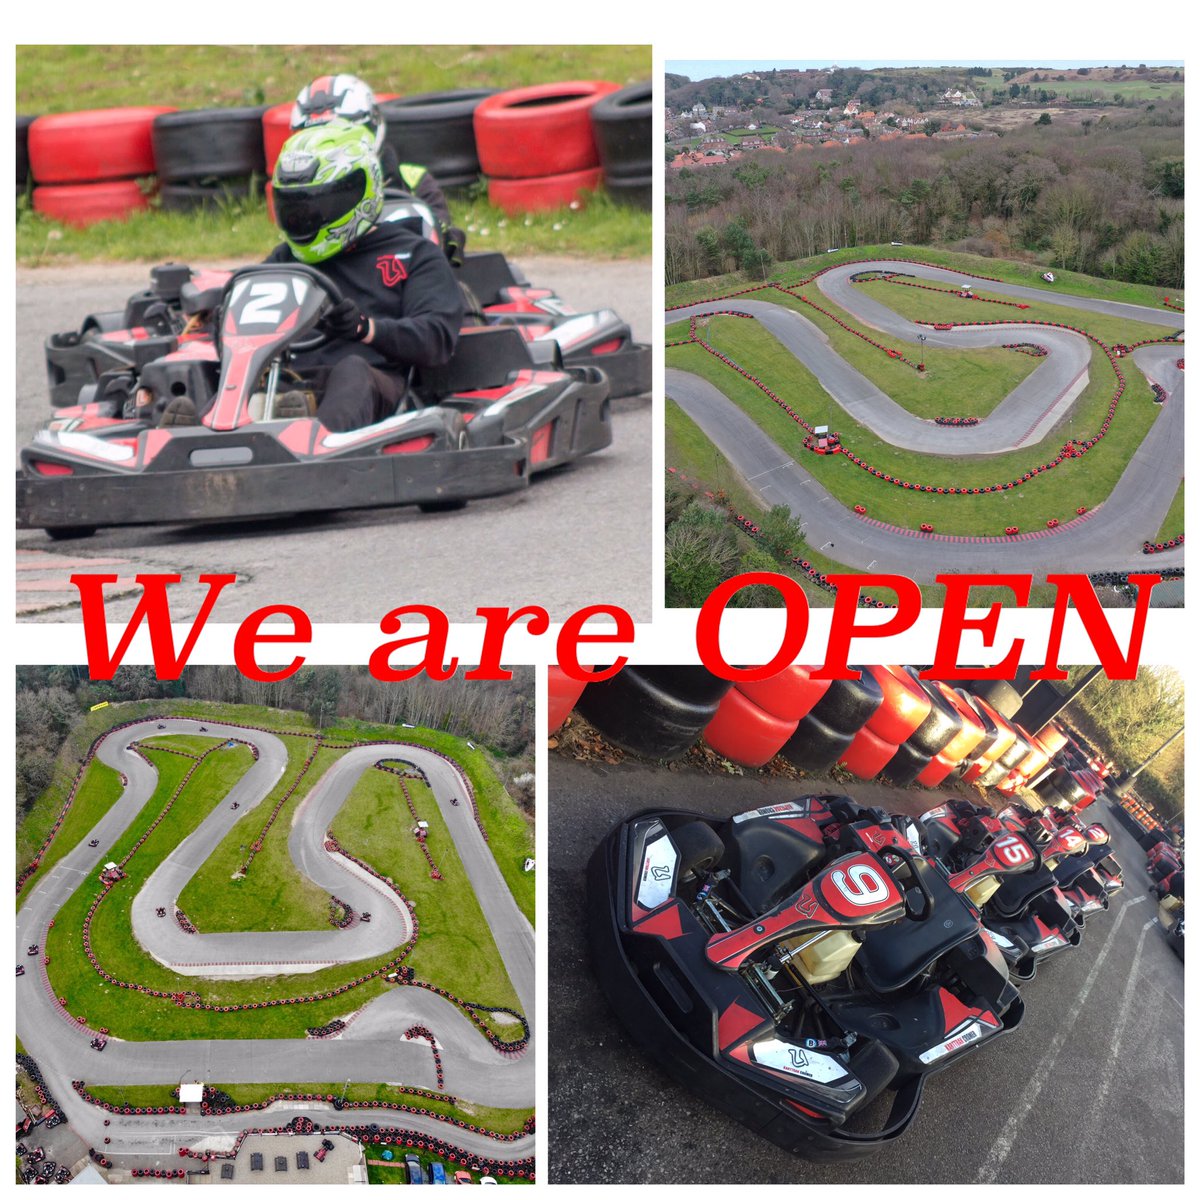 WE ARE STILL OPEN AS NORMAL..So make the most of getting some fresh air! At Karttrak Cromer we have very high standards for Hygiene and cleanliness normally, but we have stepped this up even further with regards to helmets, clothing etc for your piece of mind. Call 01263 512649